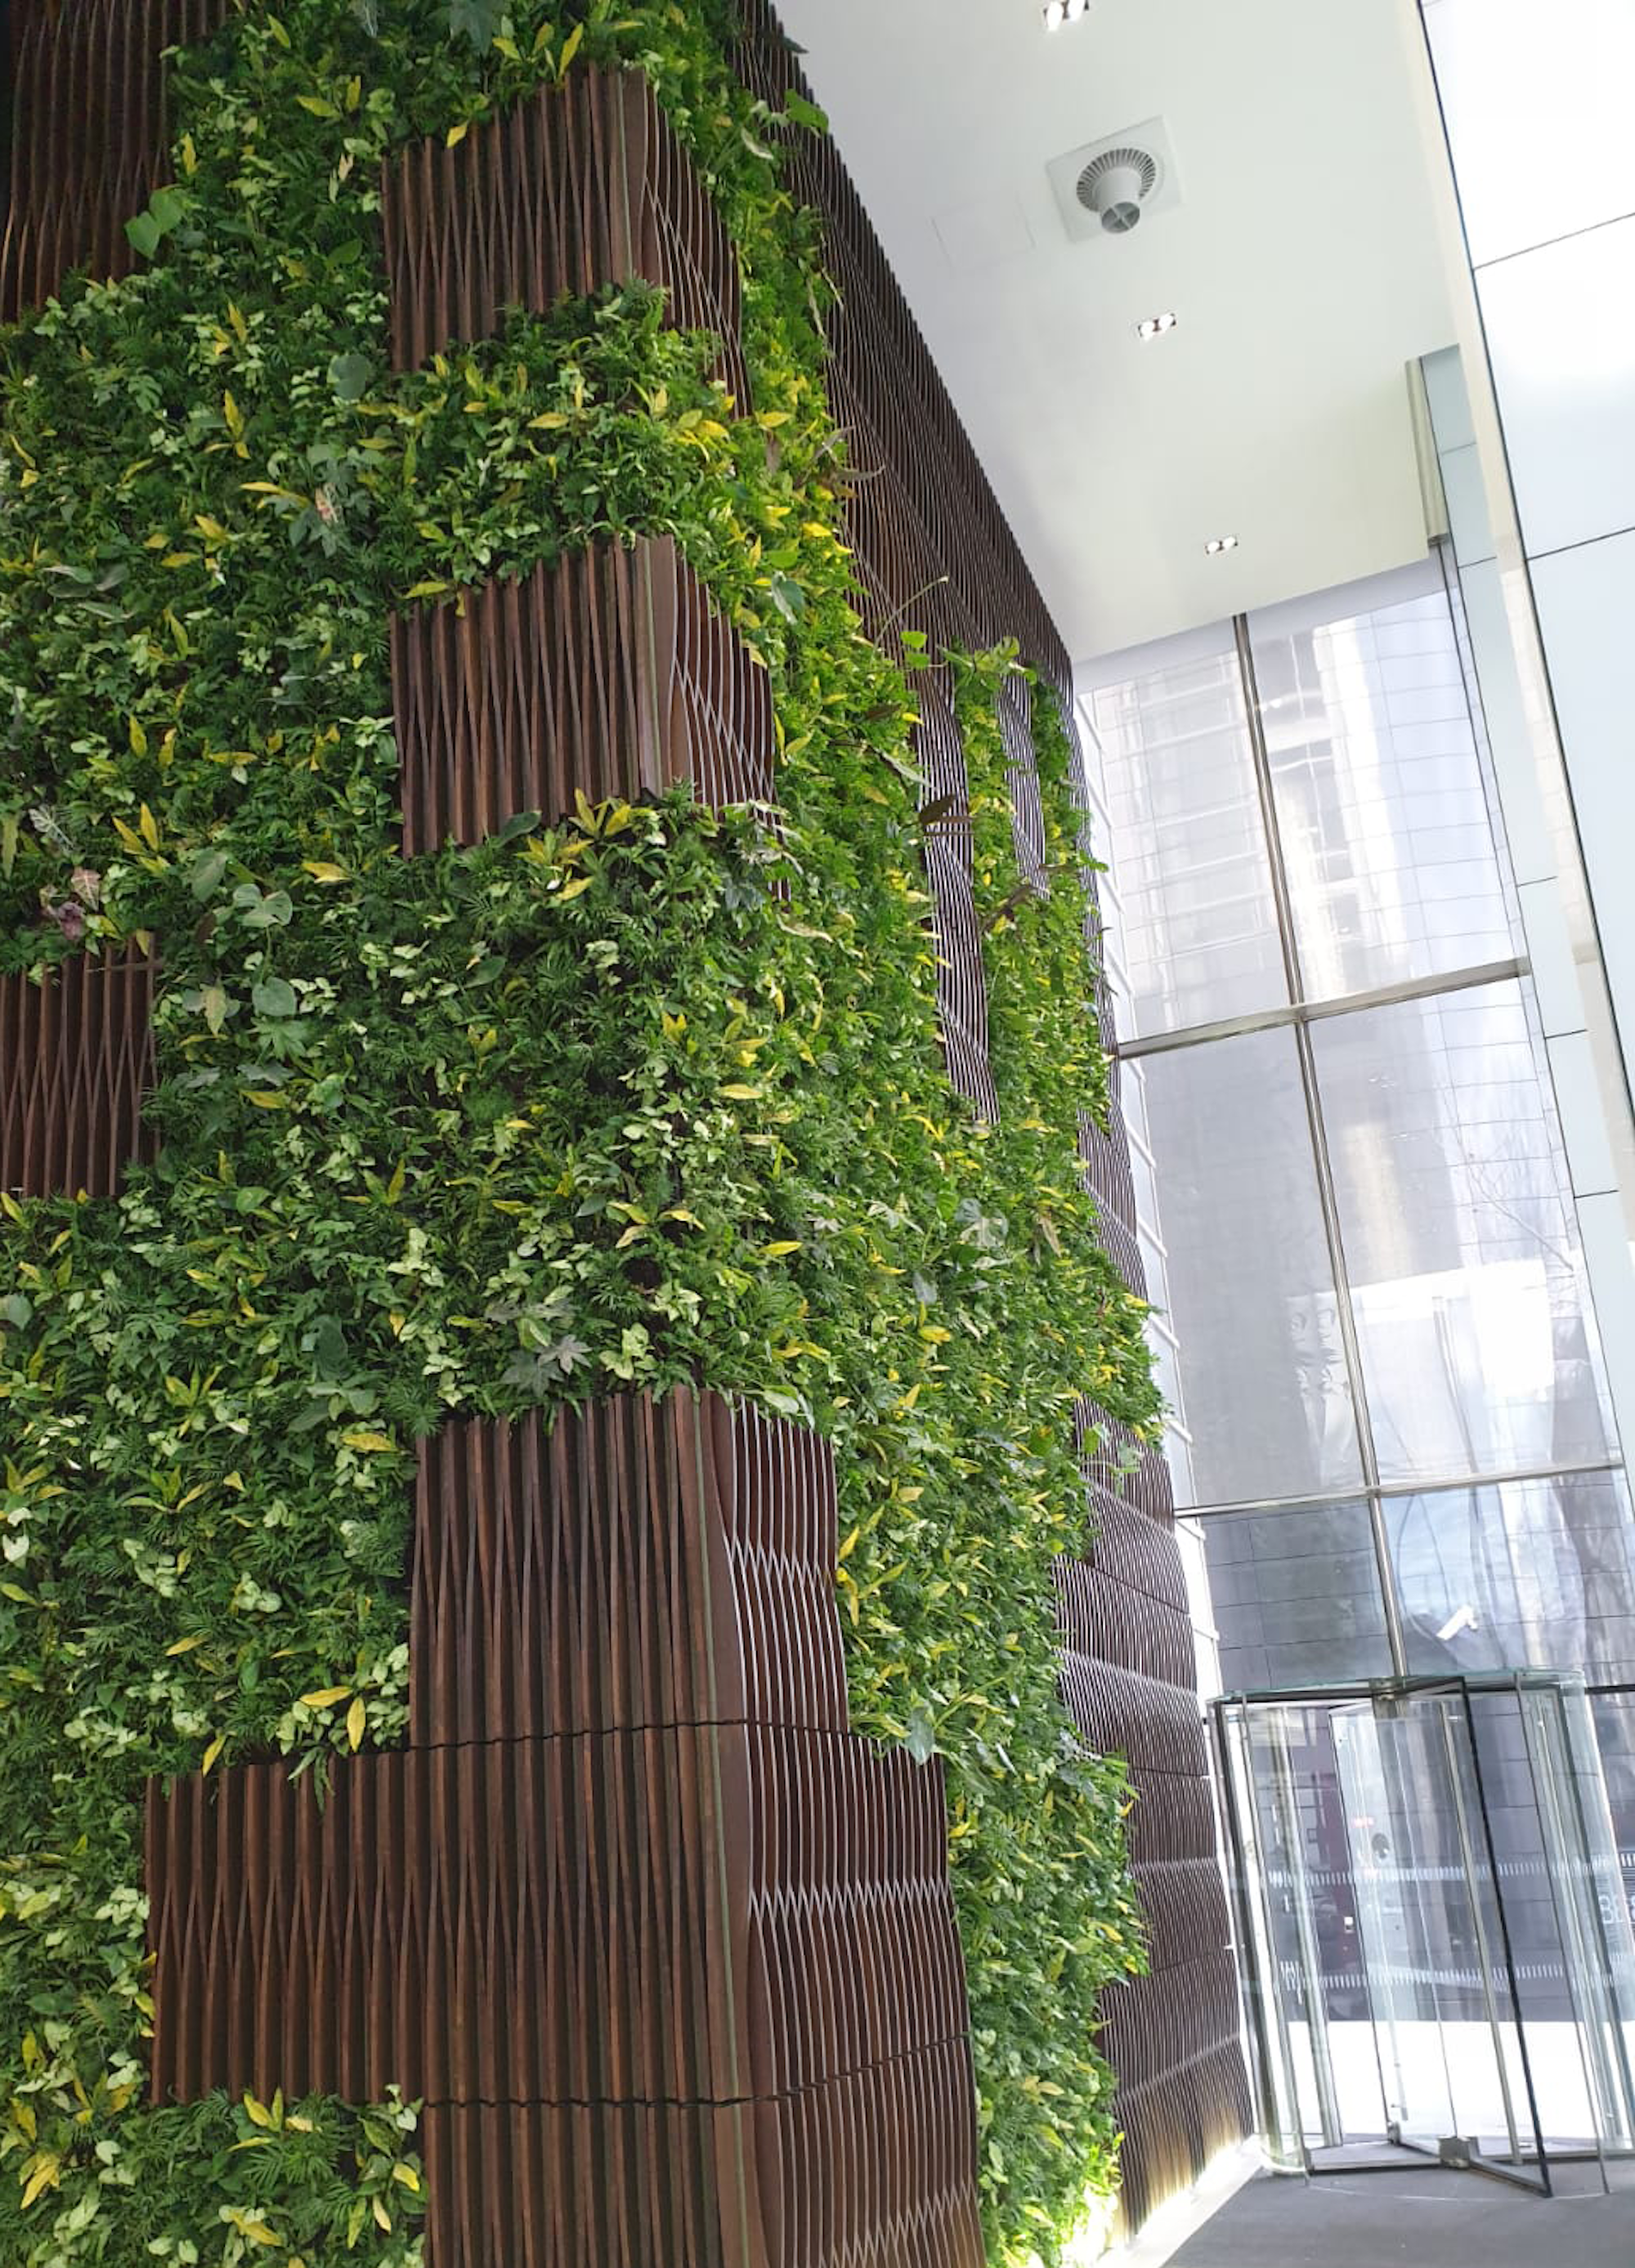 Full height of the Interior Living Wall